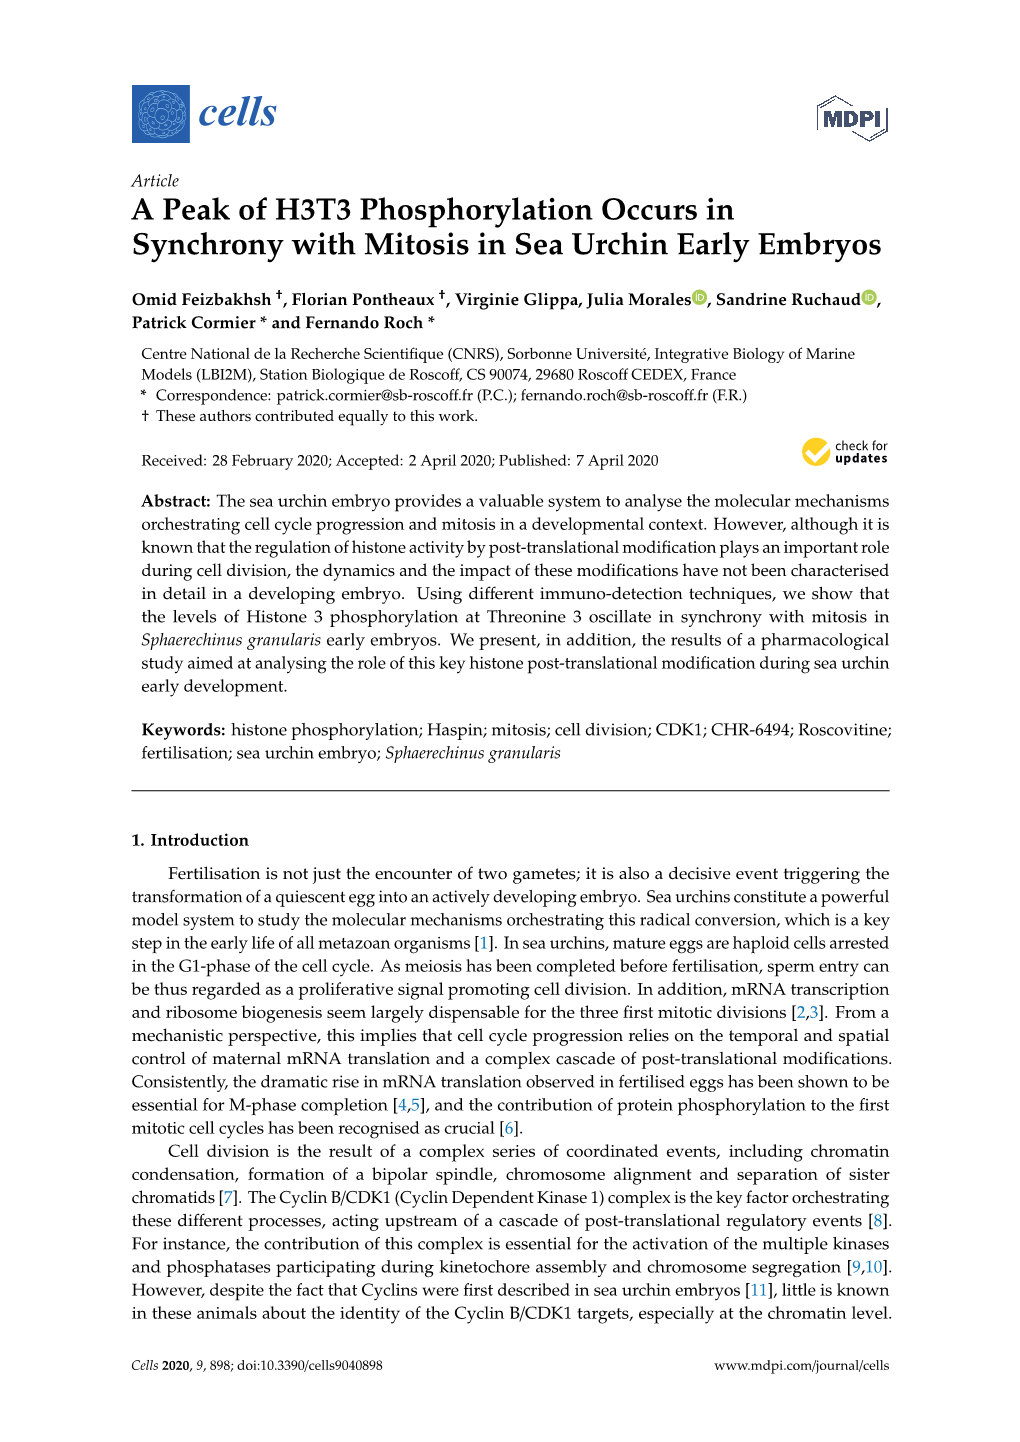 A Peak of H3T3 Phosphorylation Occurs in Synchrony with Mitosis in Sea Urchin Early Embryos